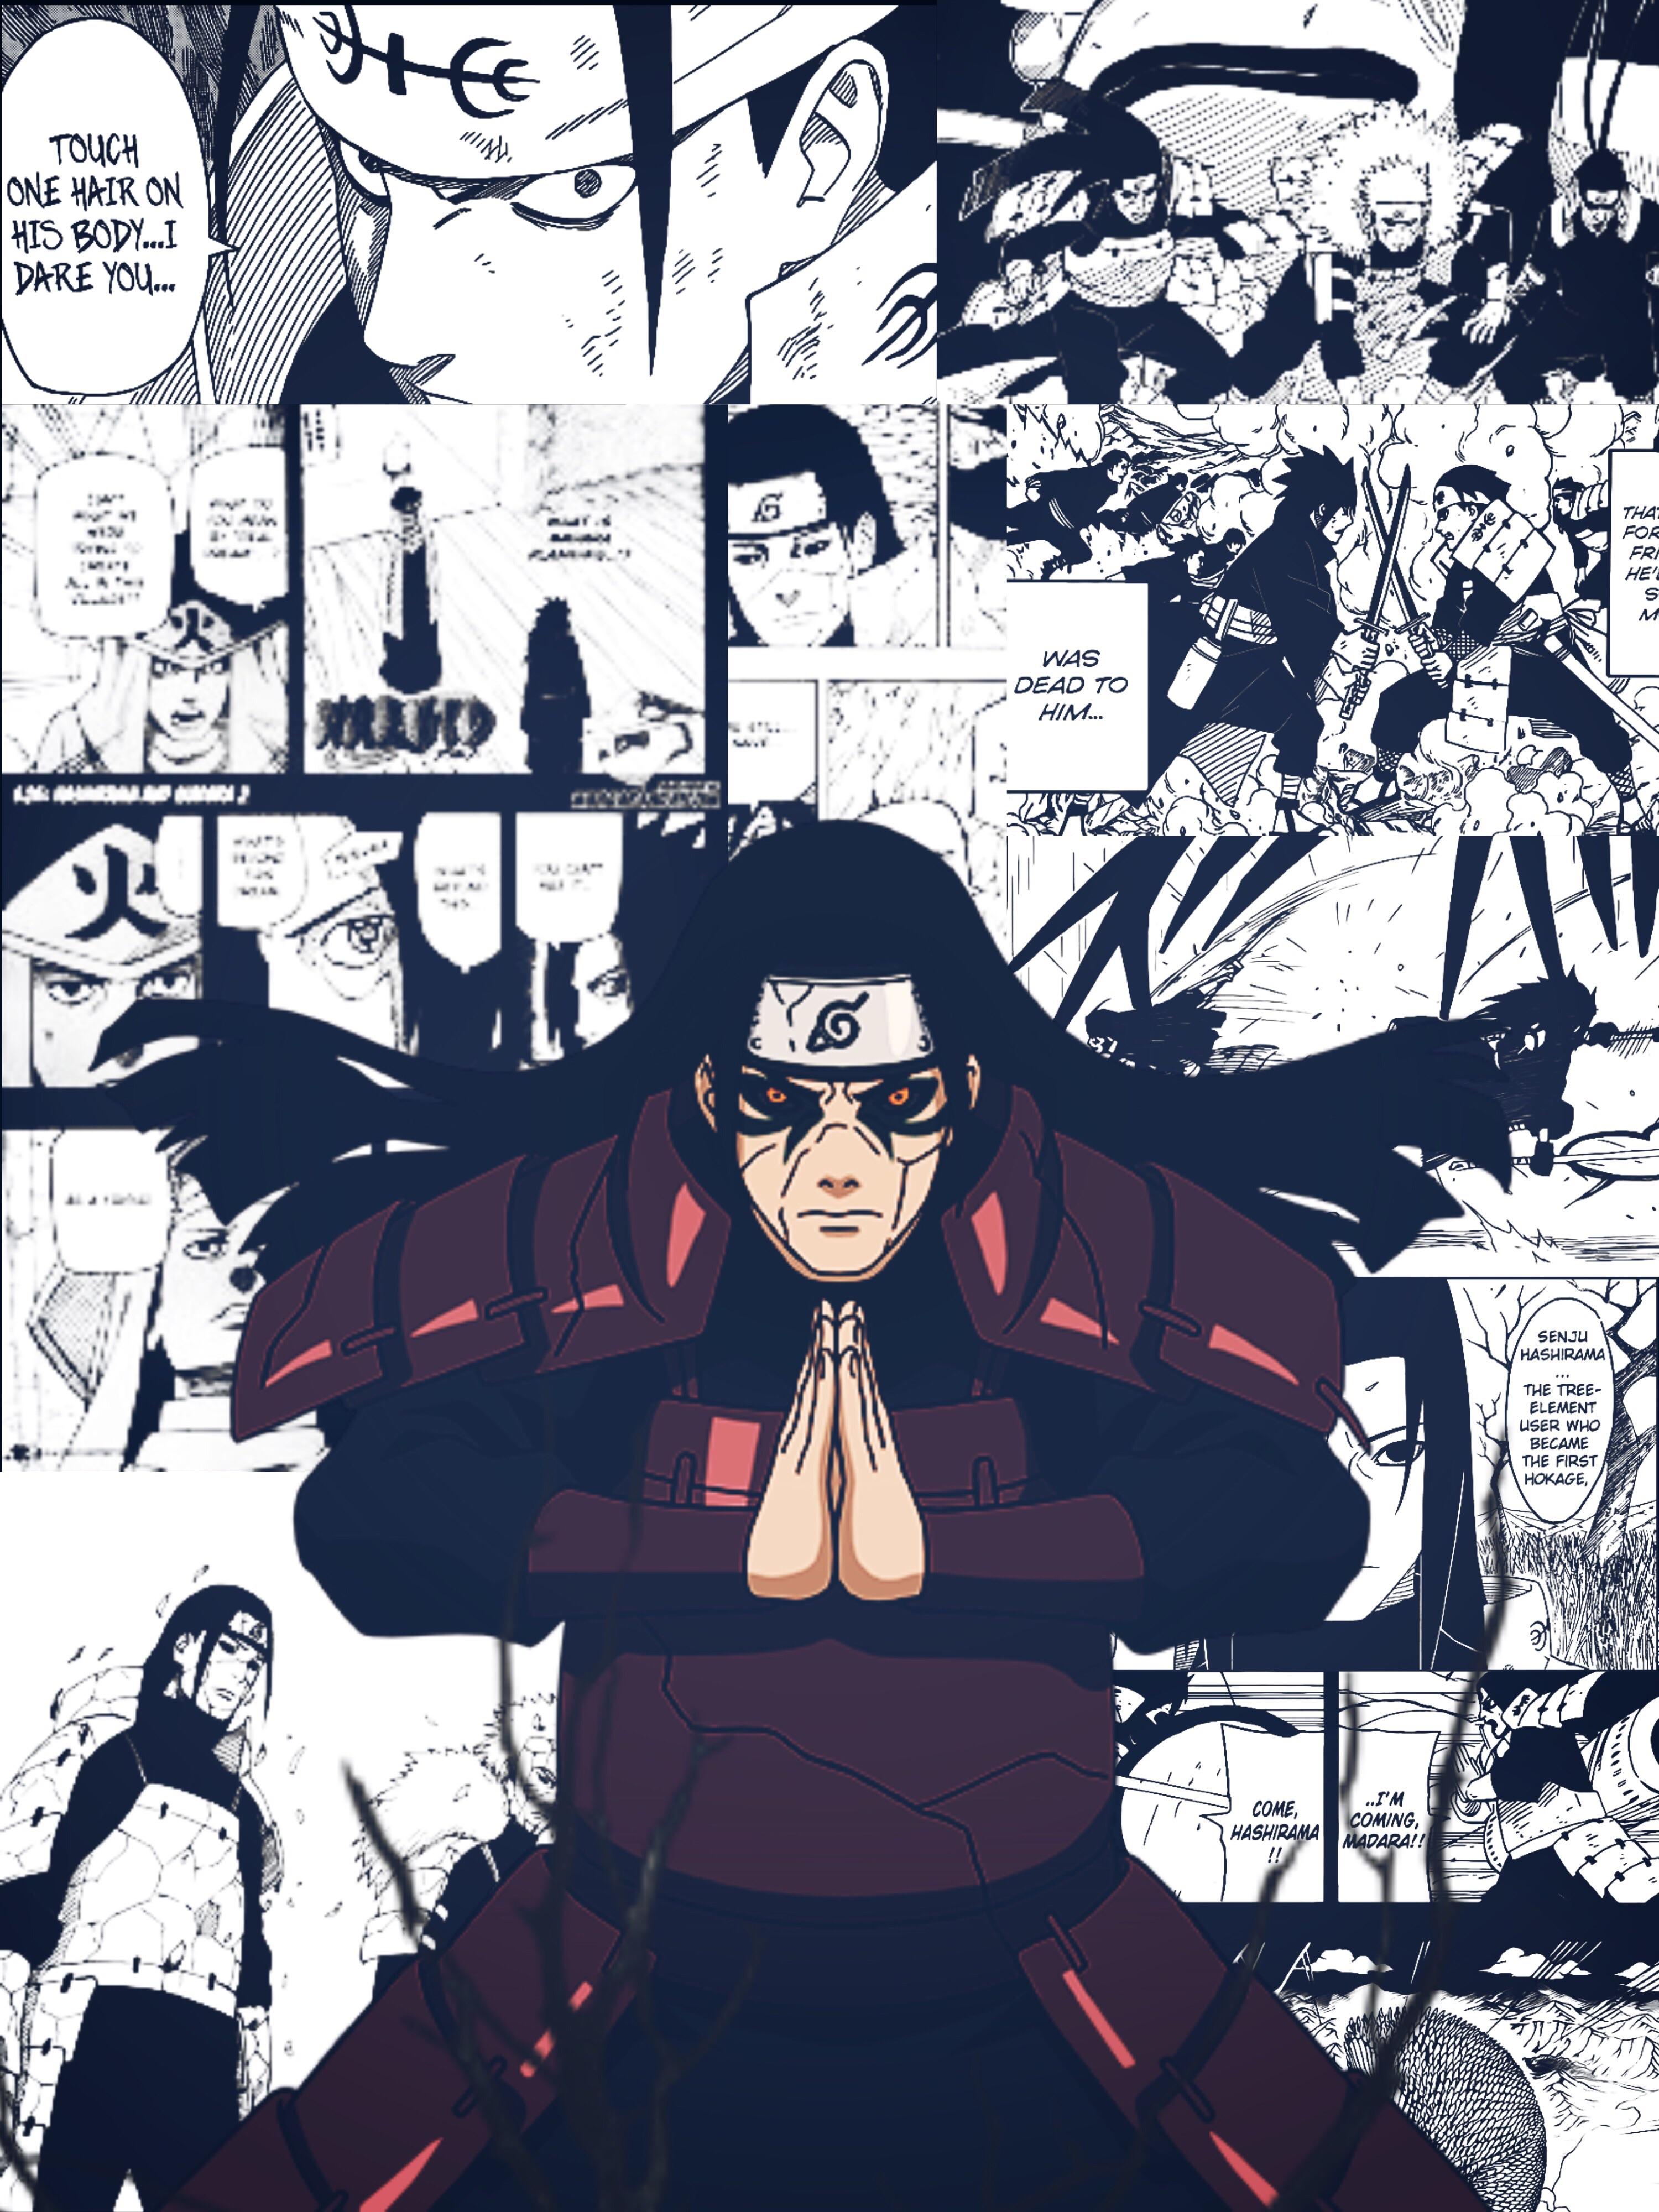 Picsi Mean I Can't Make A Madara Wallpaper Without, HD